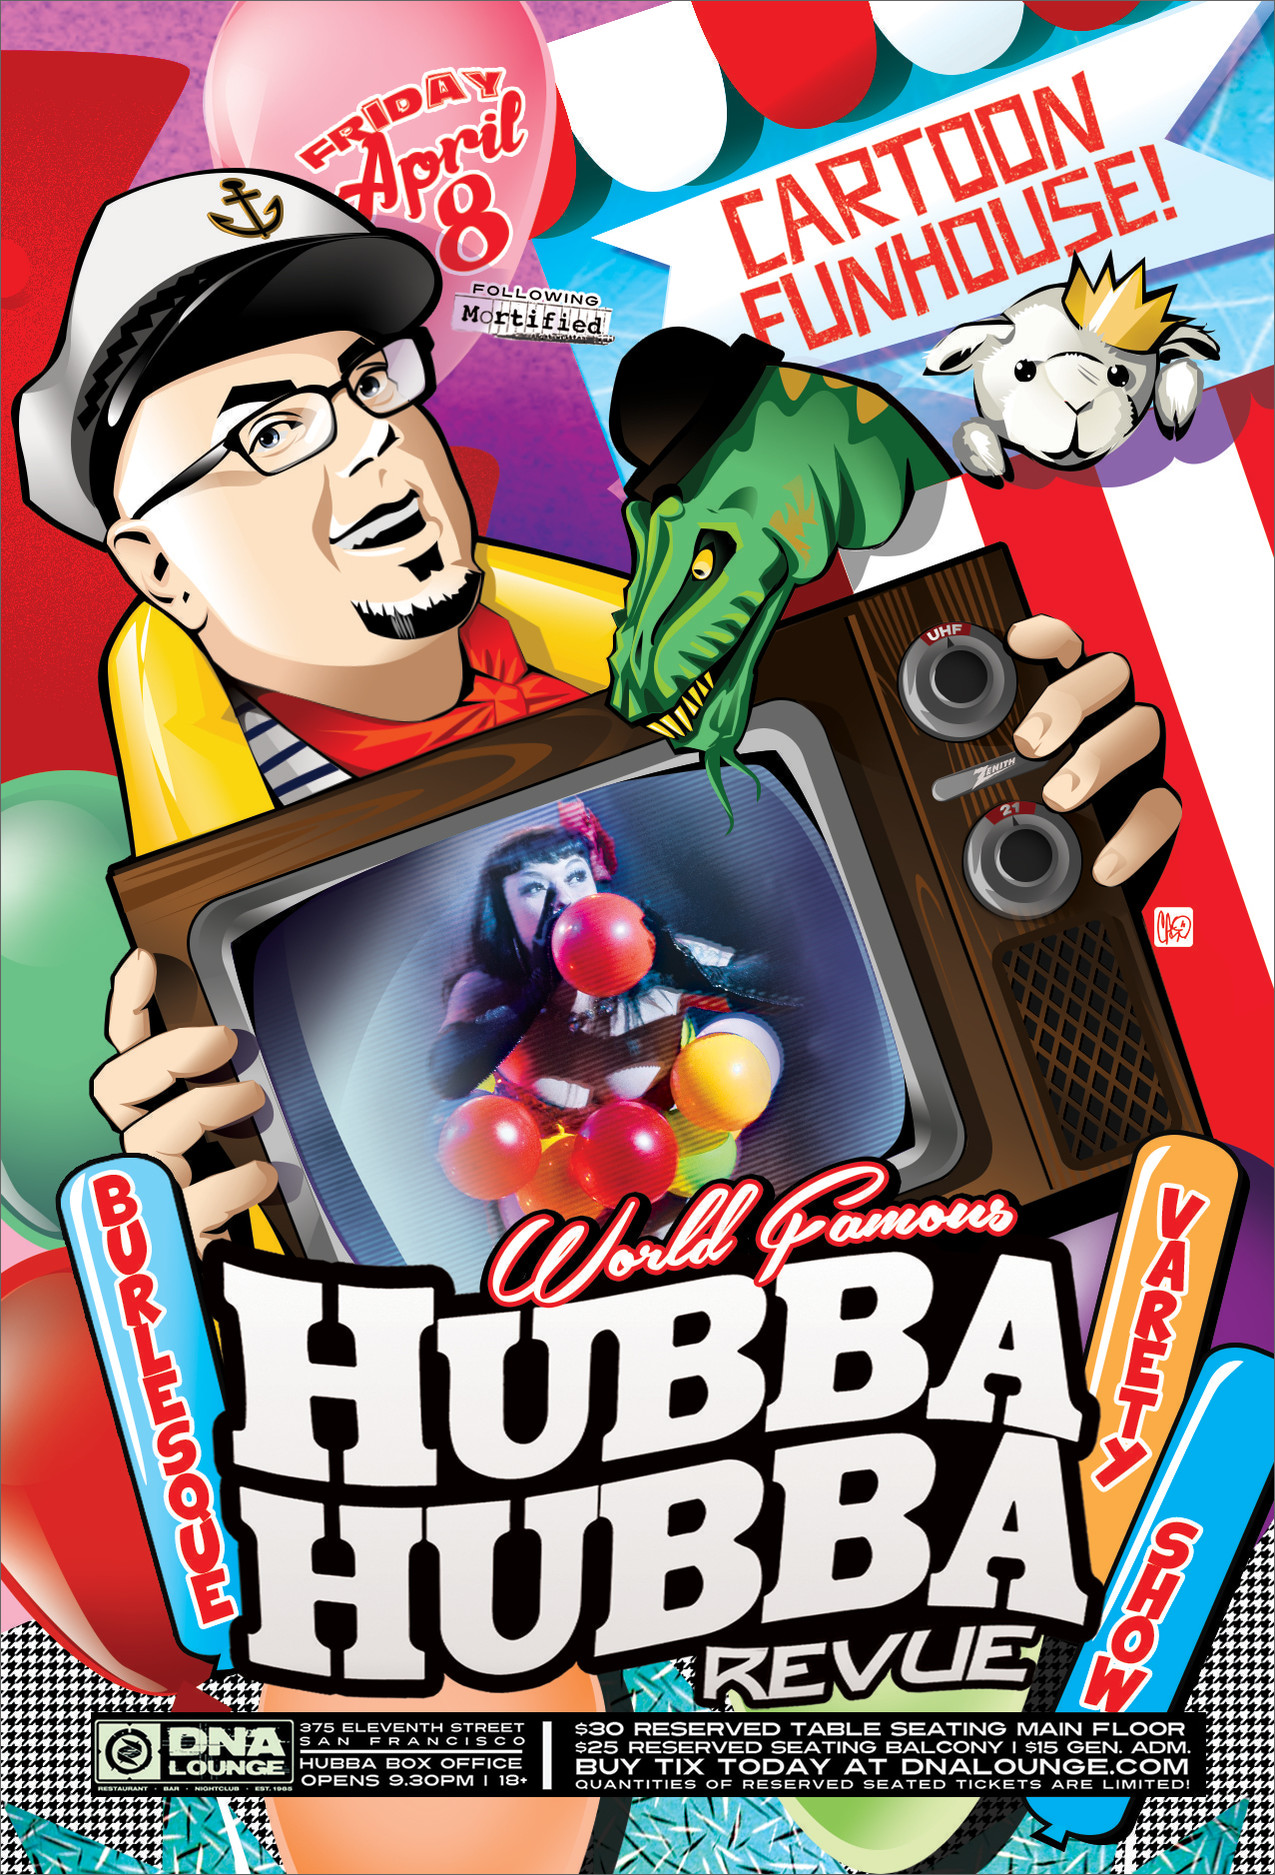 DNA Lounge Live: Hubba Hubba Revue: Cartoon Funhouse (2016-04-08) : Free  Download, Borrow, and Streaming : Internet Archive